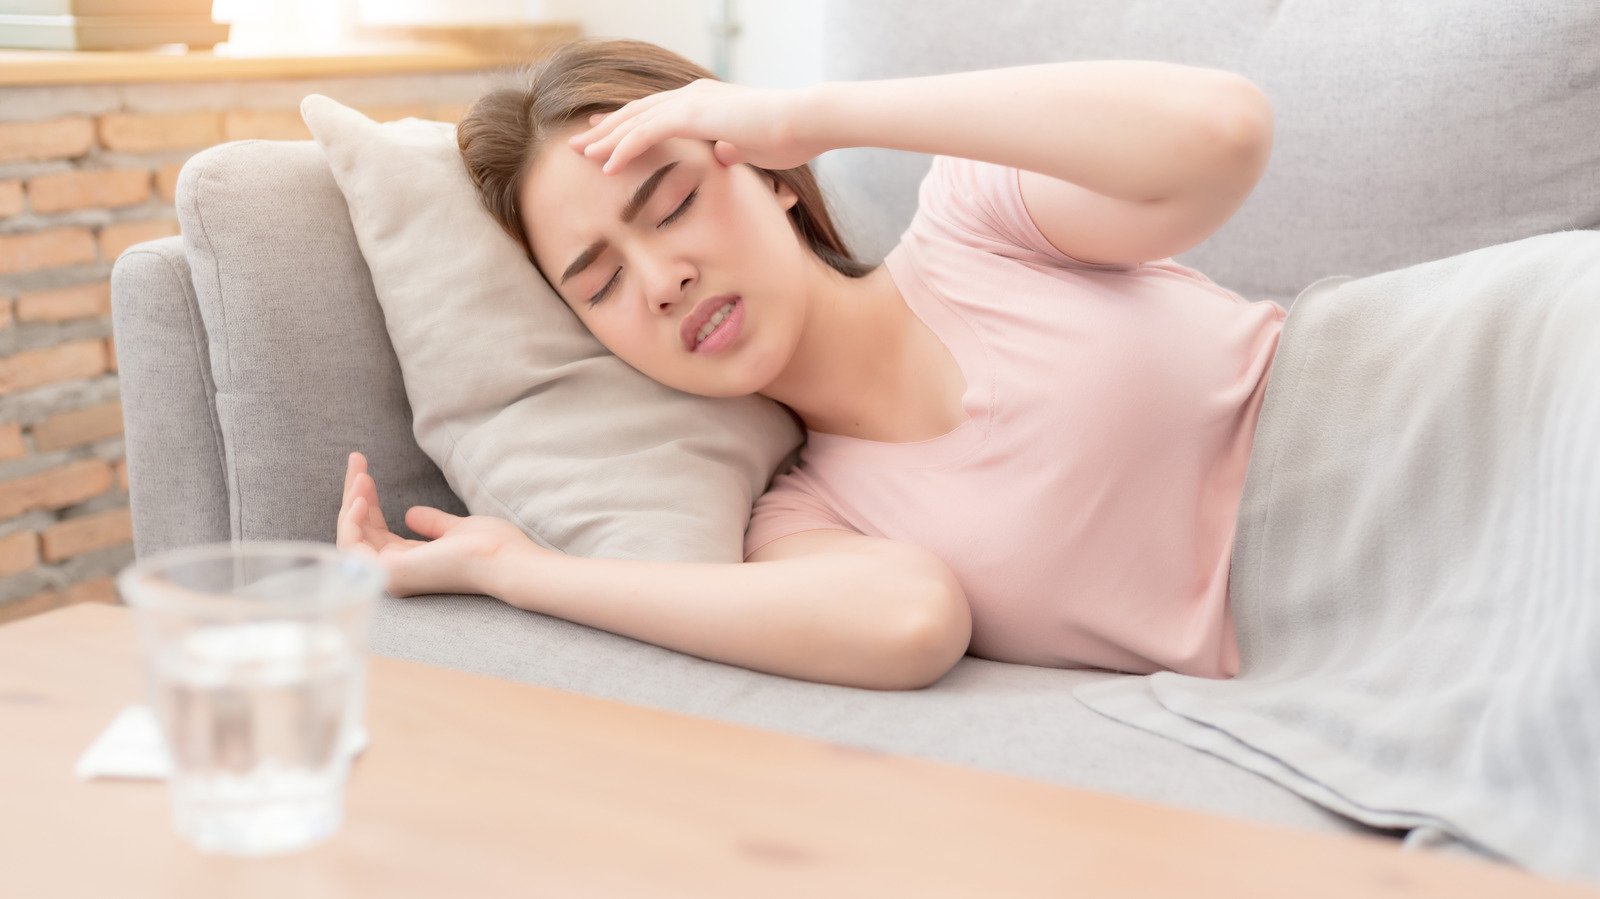 The Real Reason You Need To Drink More Fluids When You're Sick